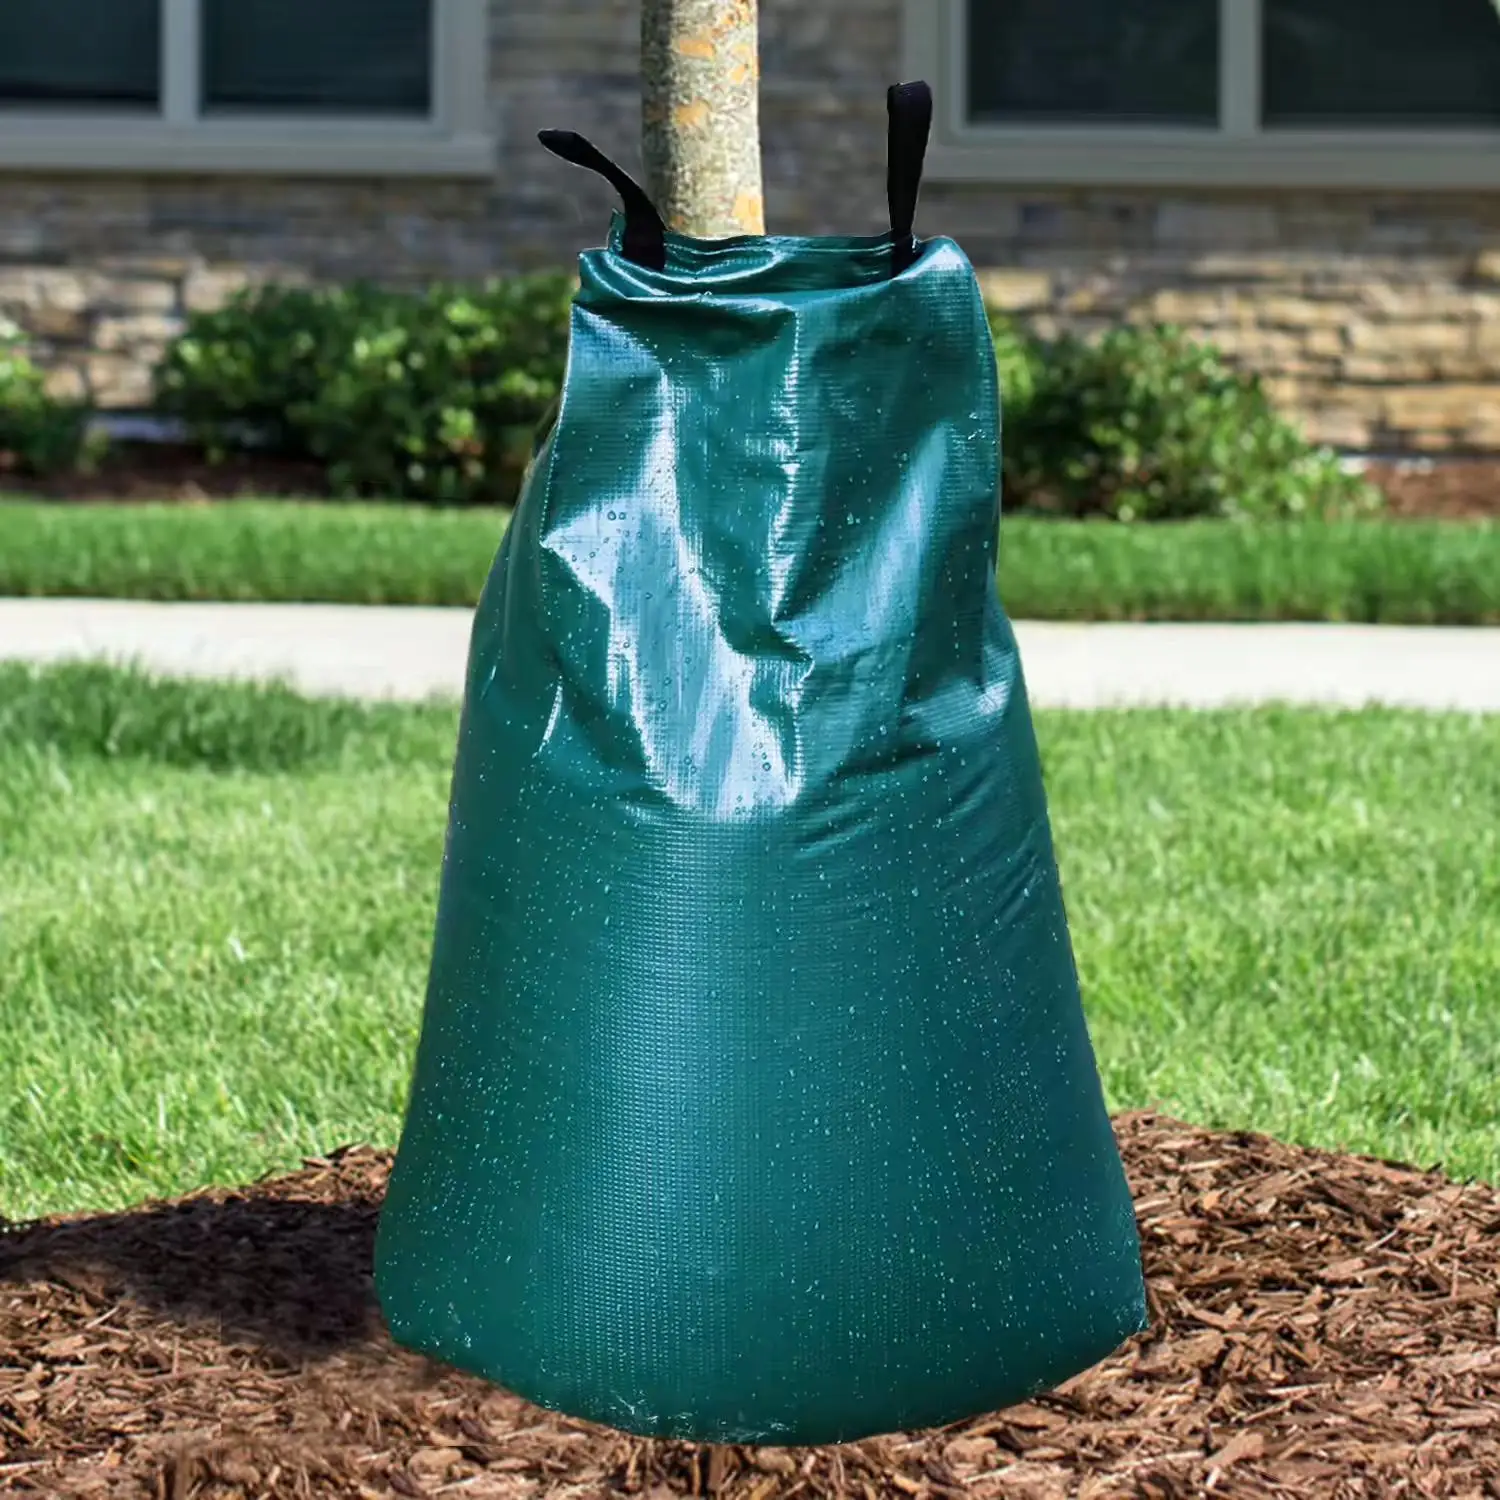 20 Gallon Heavy Duty Pvc Tree Watering Bag Automatic Drip Irrigation Slow Release Drip Water Bag